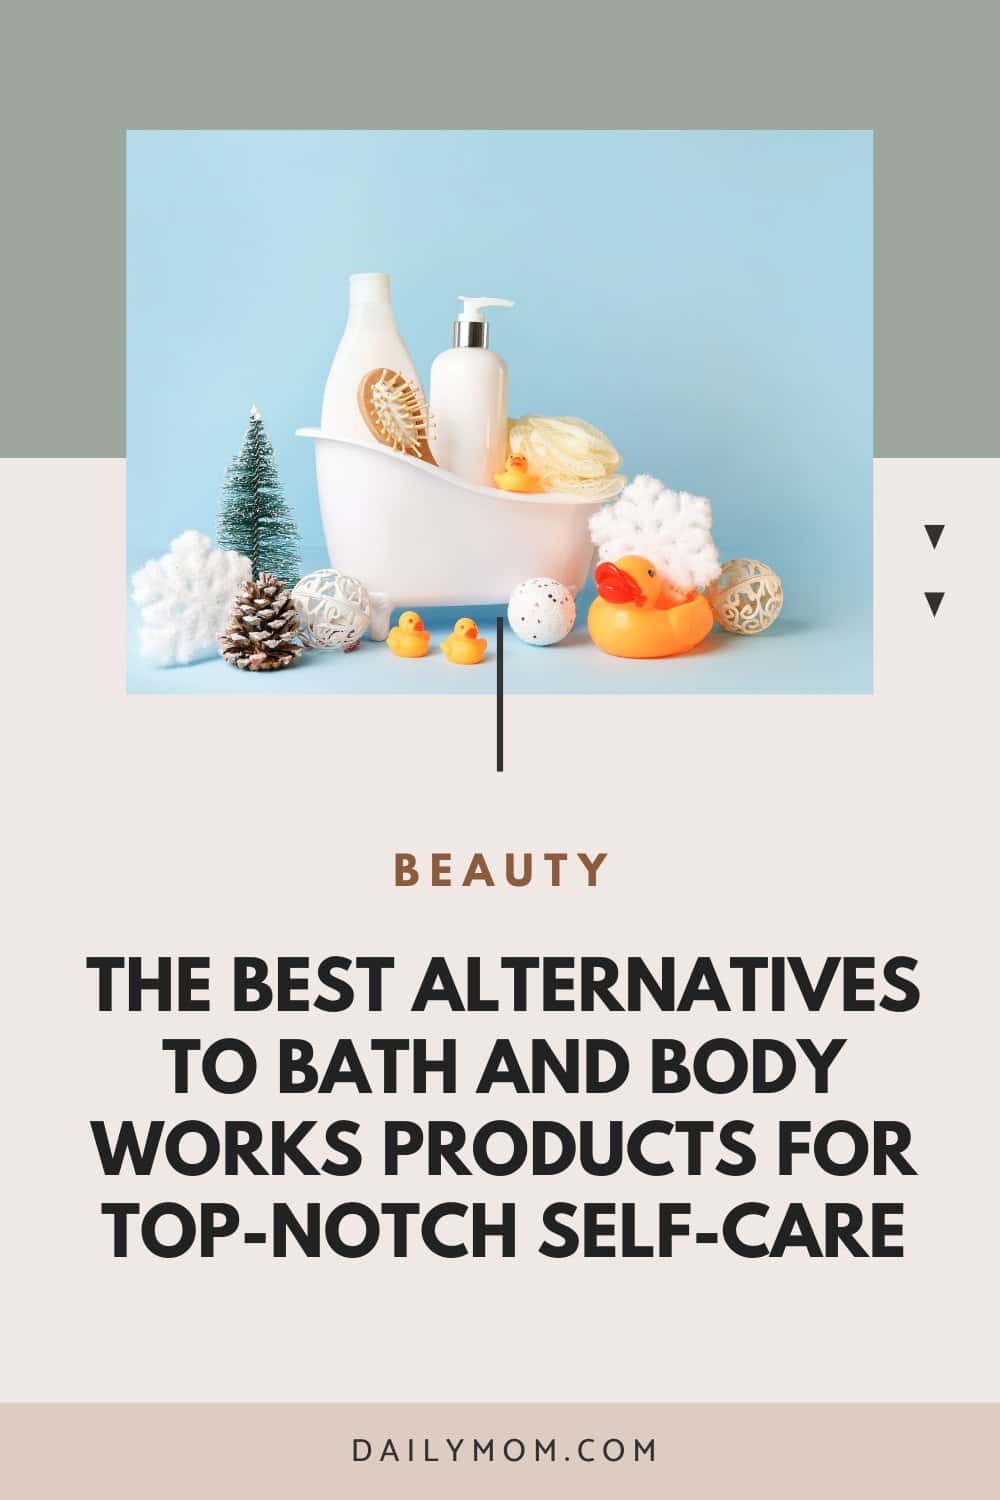 The Best Alternatives To Bath And Body Works Products For Top-Notch Self-Care 38 Daily Mom, Magazine For Families